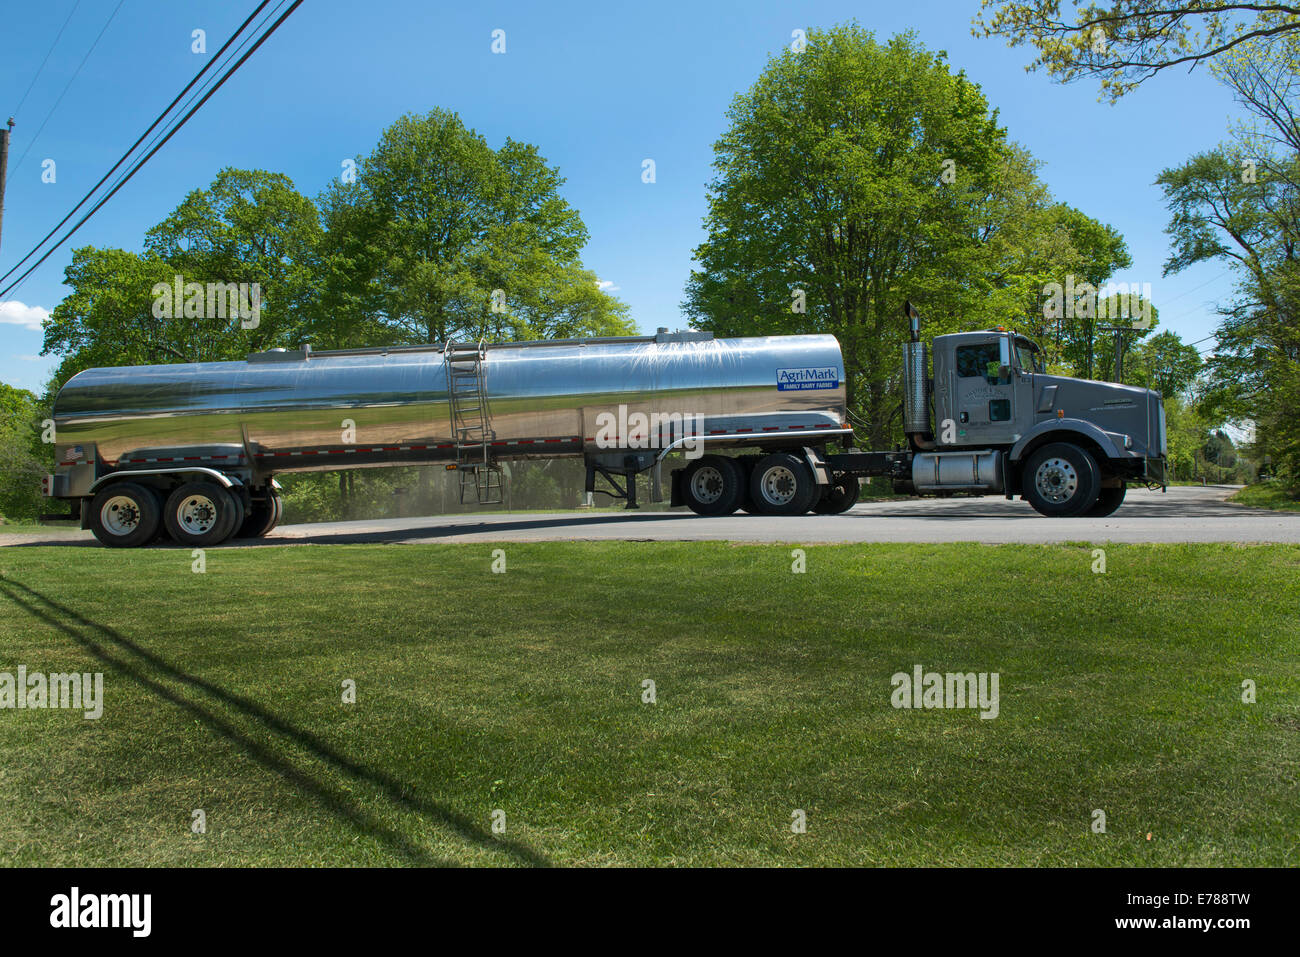 Tank or tanker truck visits dairy farm collecting mik for Agri-Mark cooperative.  Woodbury, CT. Stock Photo